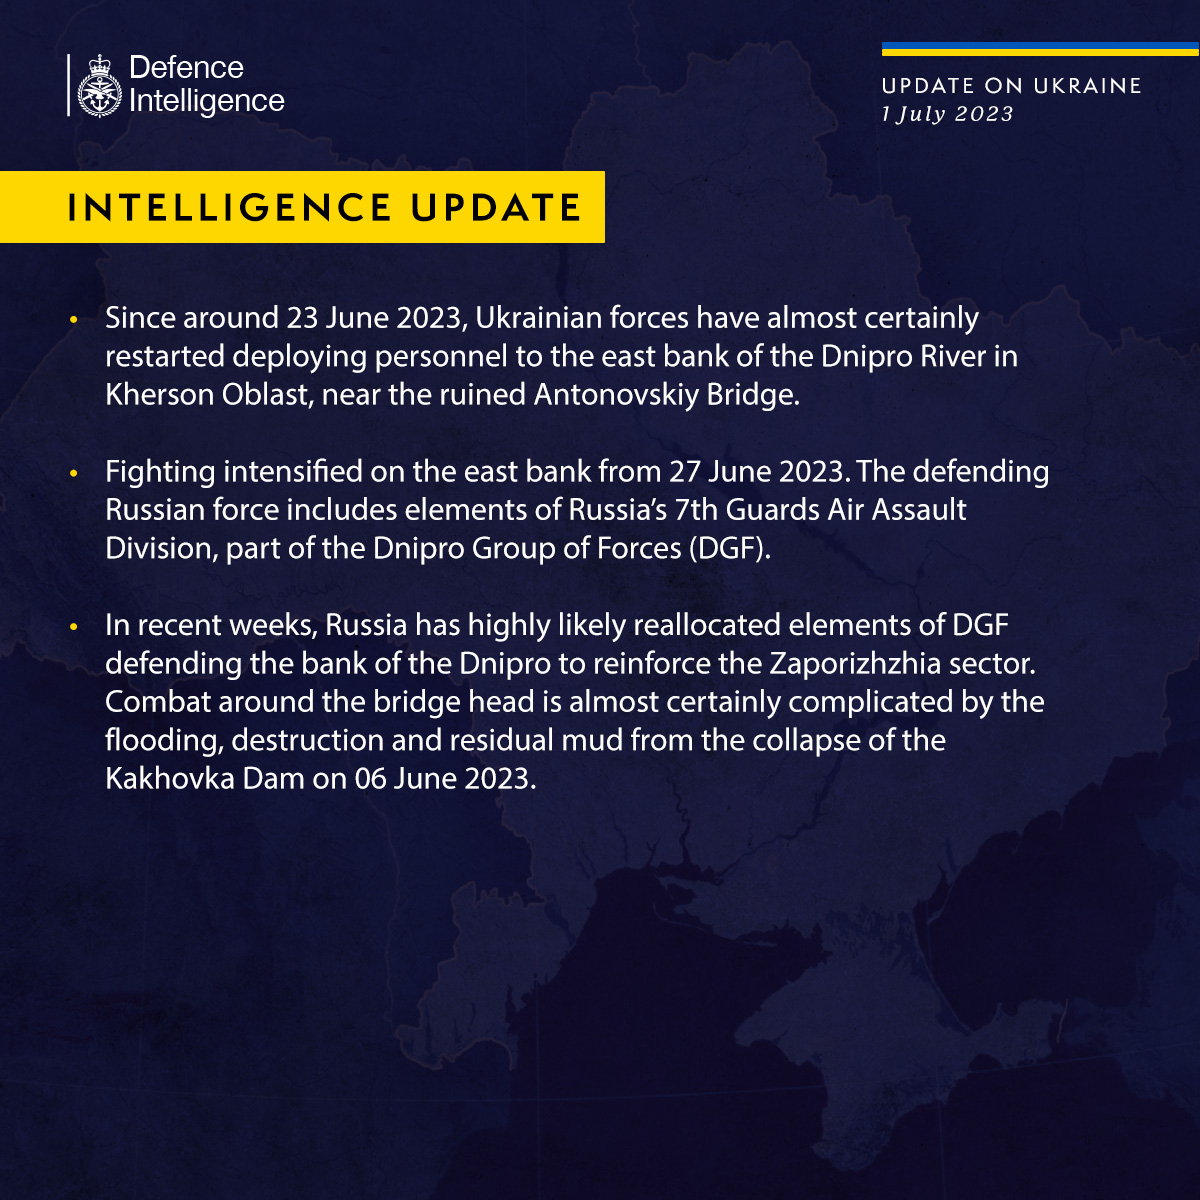 The UK Defense Intelligence Says About Ukrainian Troops Actions on Dnipro River’s East Bank, Defense Express